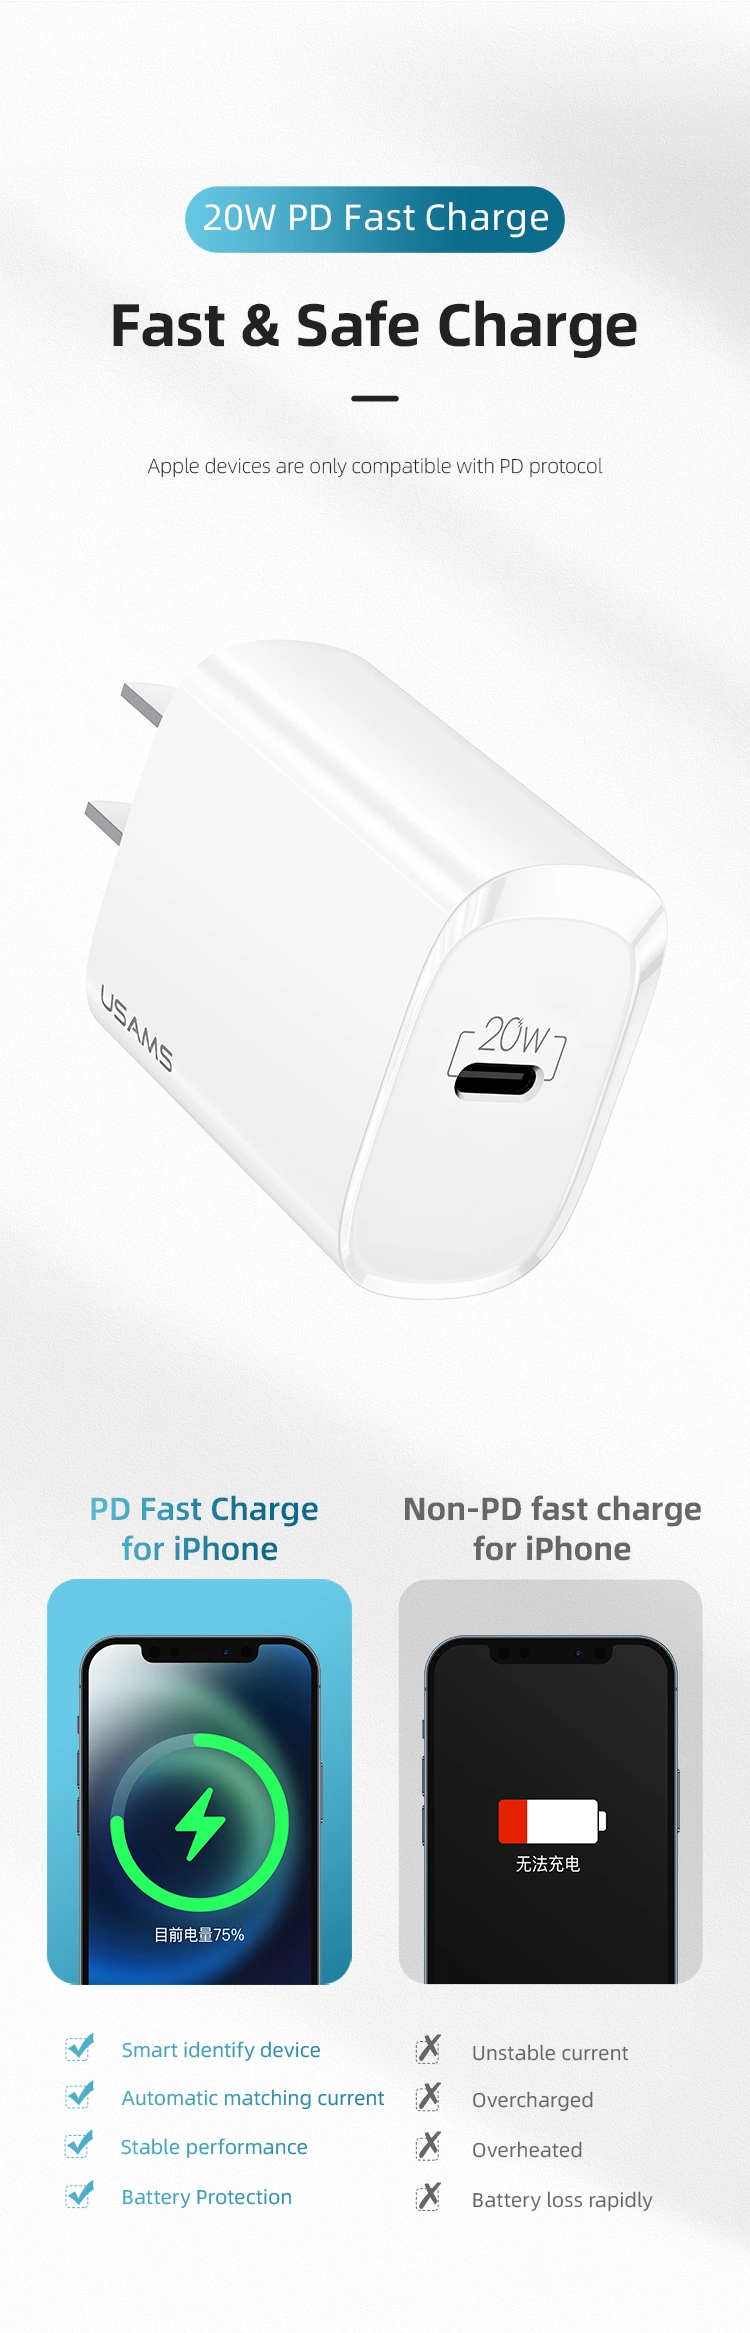 Usams Best Price Fast Pd Charger for iPhone Fast Pd Wall Charger